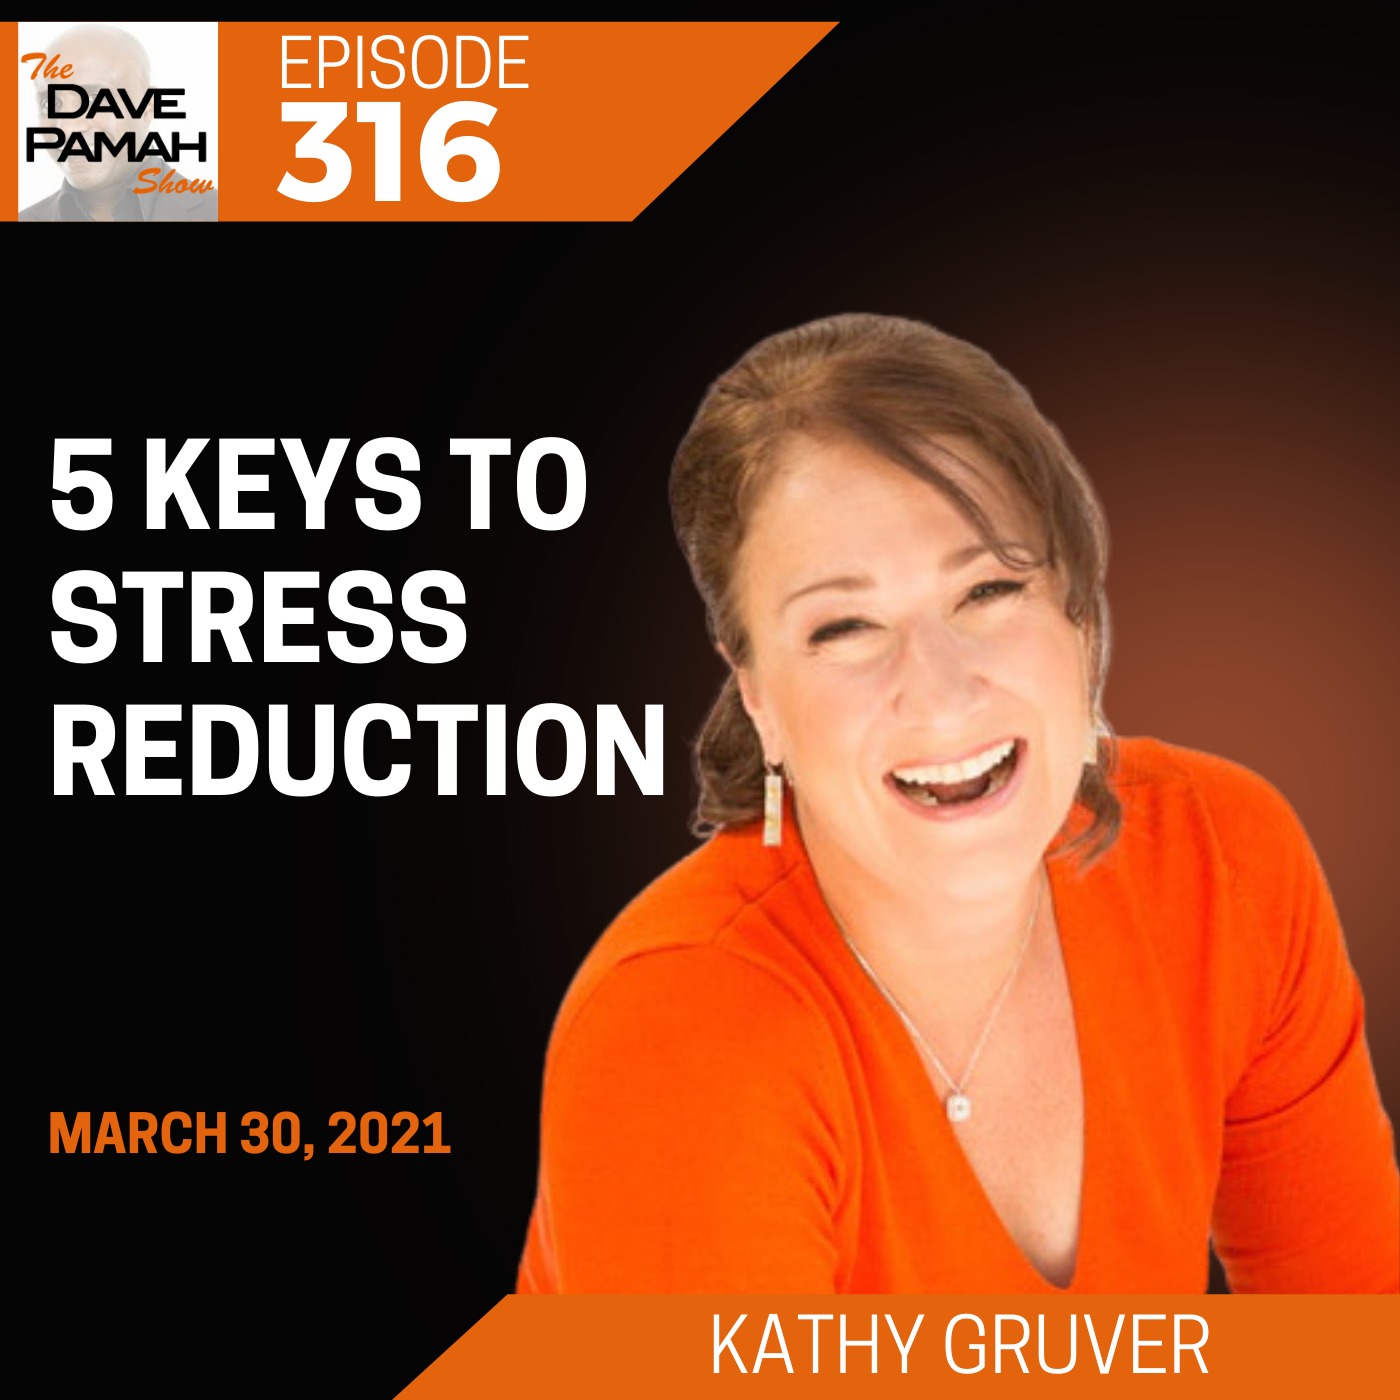 5 keys to stress reduction with Kathy Gruver Image